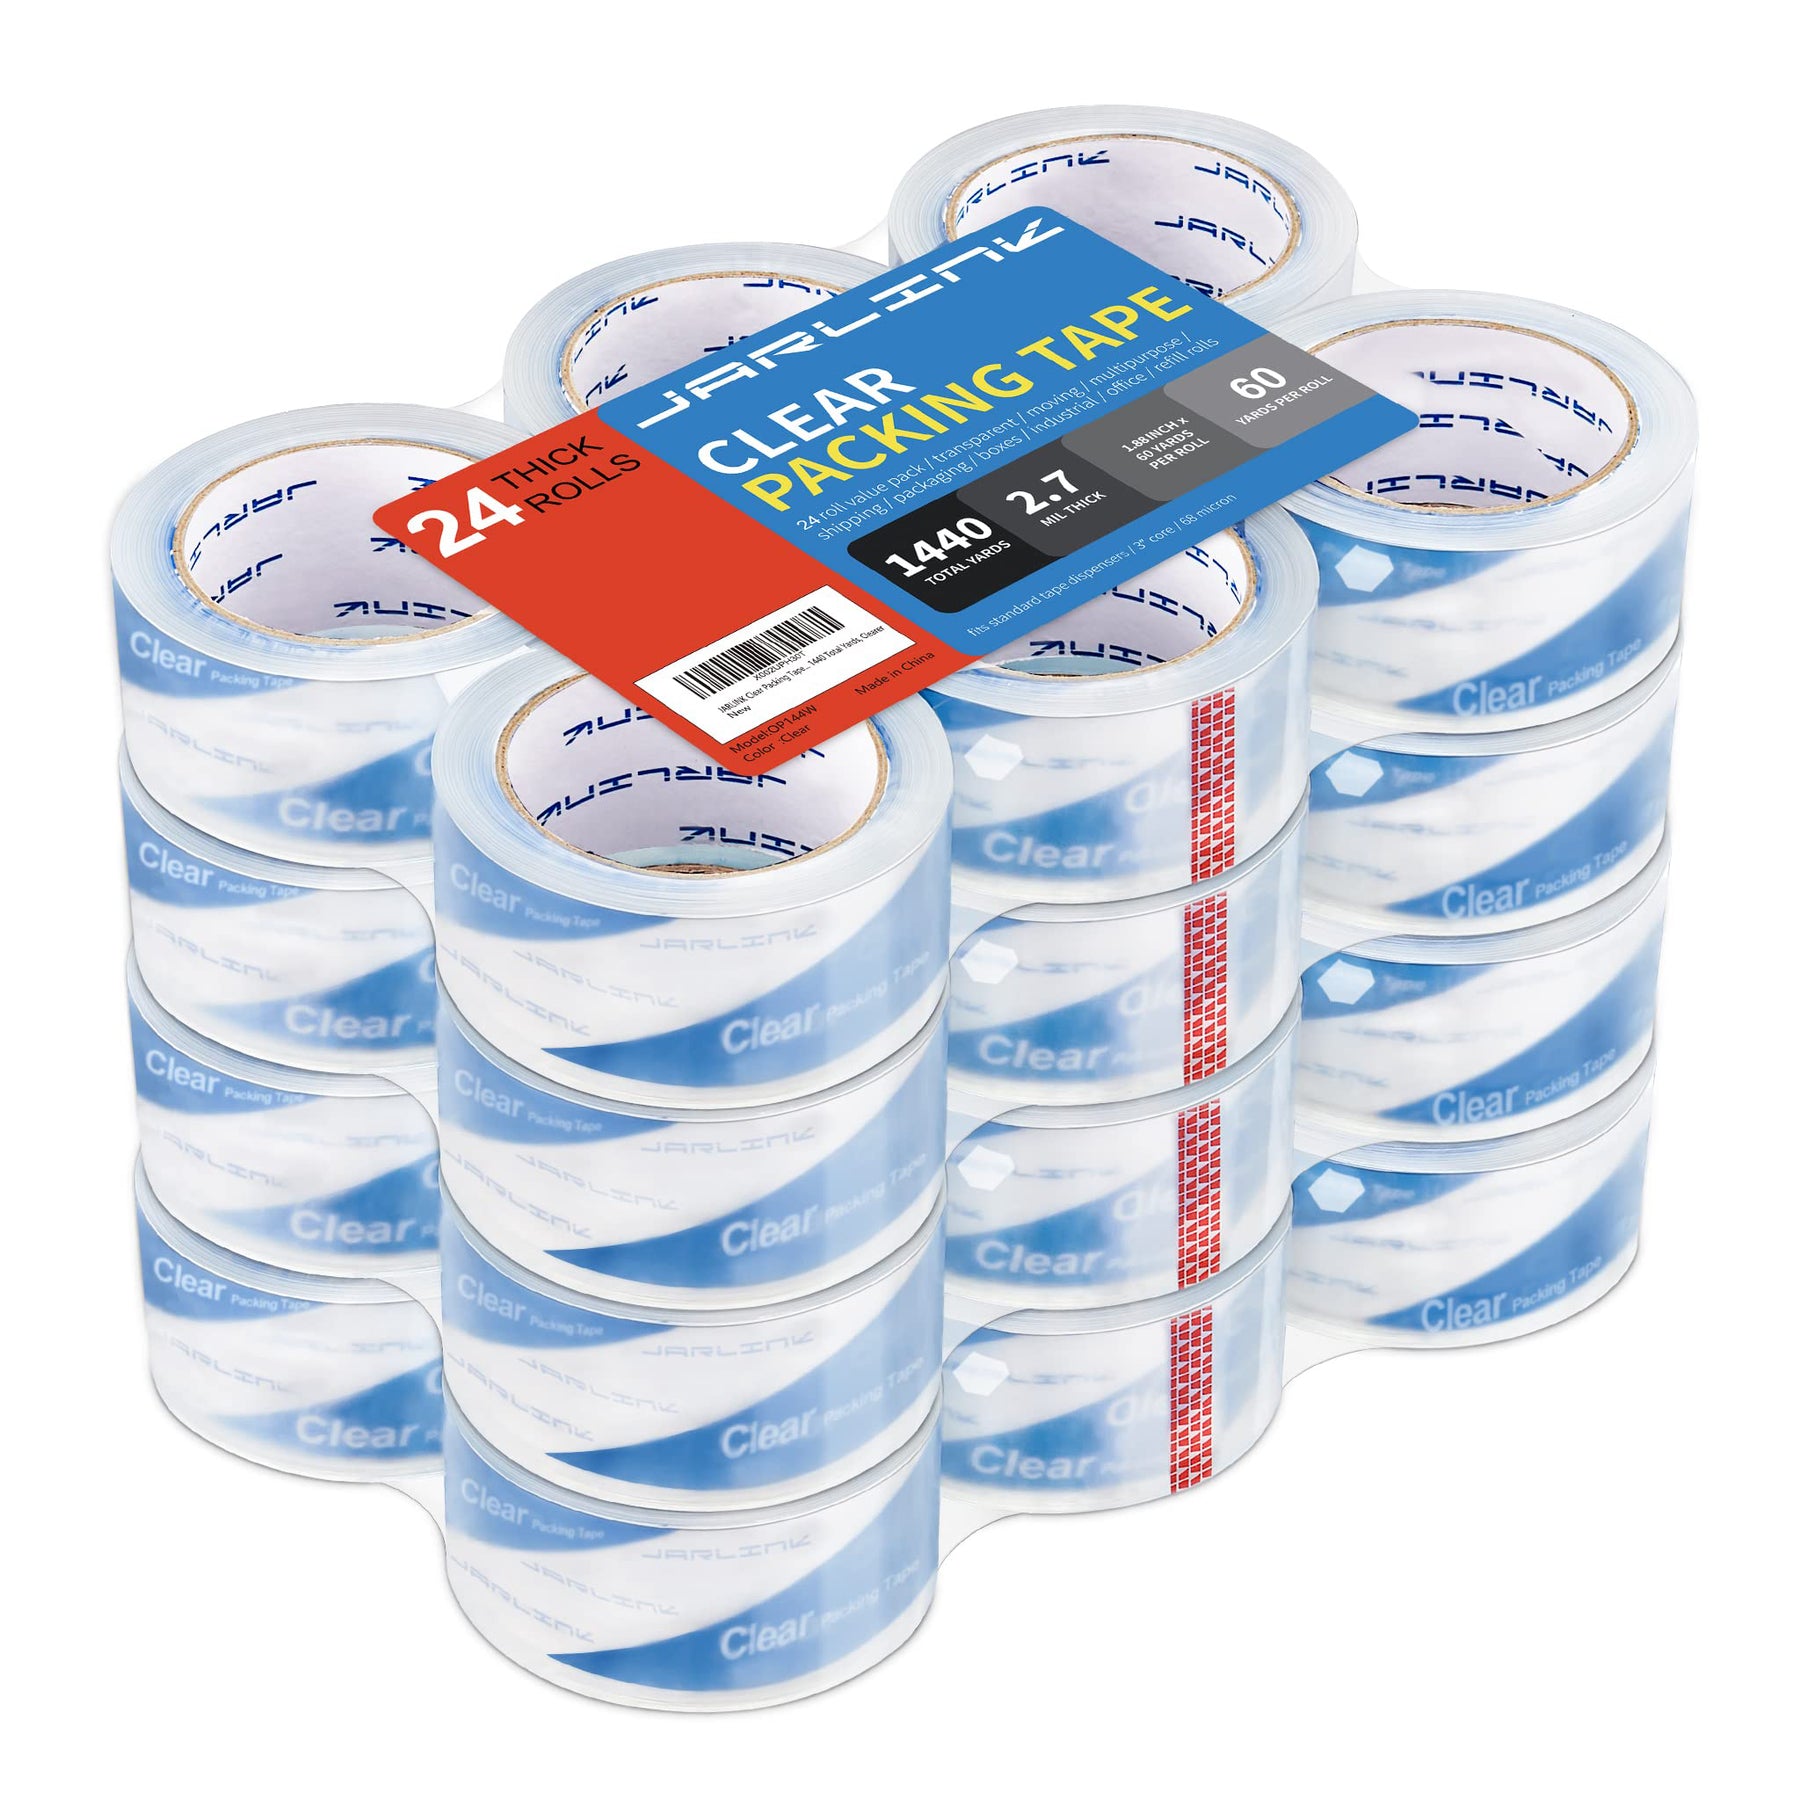 JARLINK Clear Packing Tape (12 Rolls), Heavy Duty Packaging Tape for S